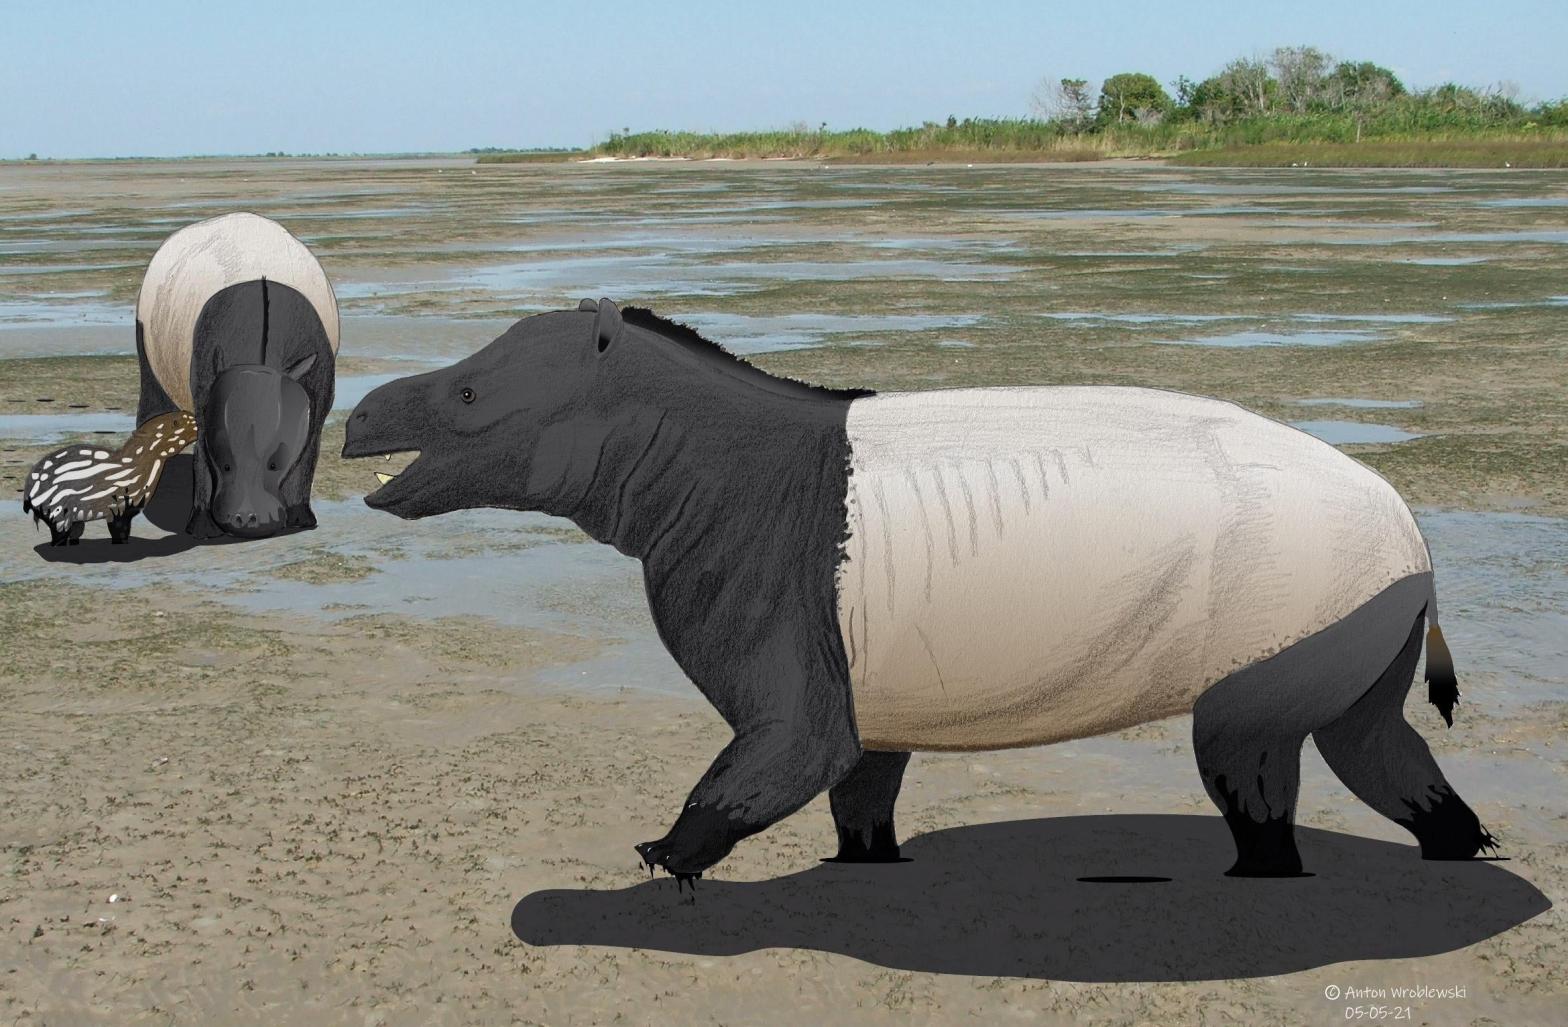 Hippos and tapirs the size of bears once roamed Wyoming, and left their mark. (Illustration: Anton Wroblewski)